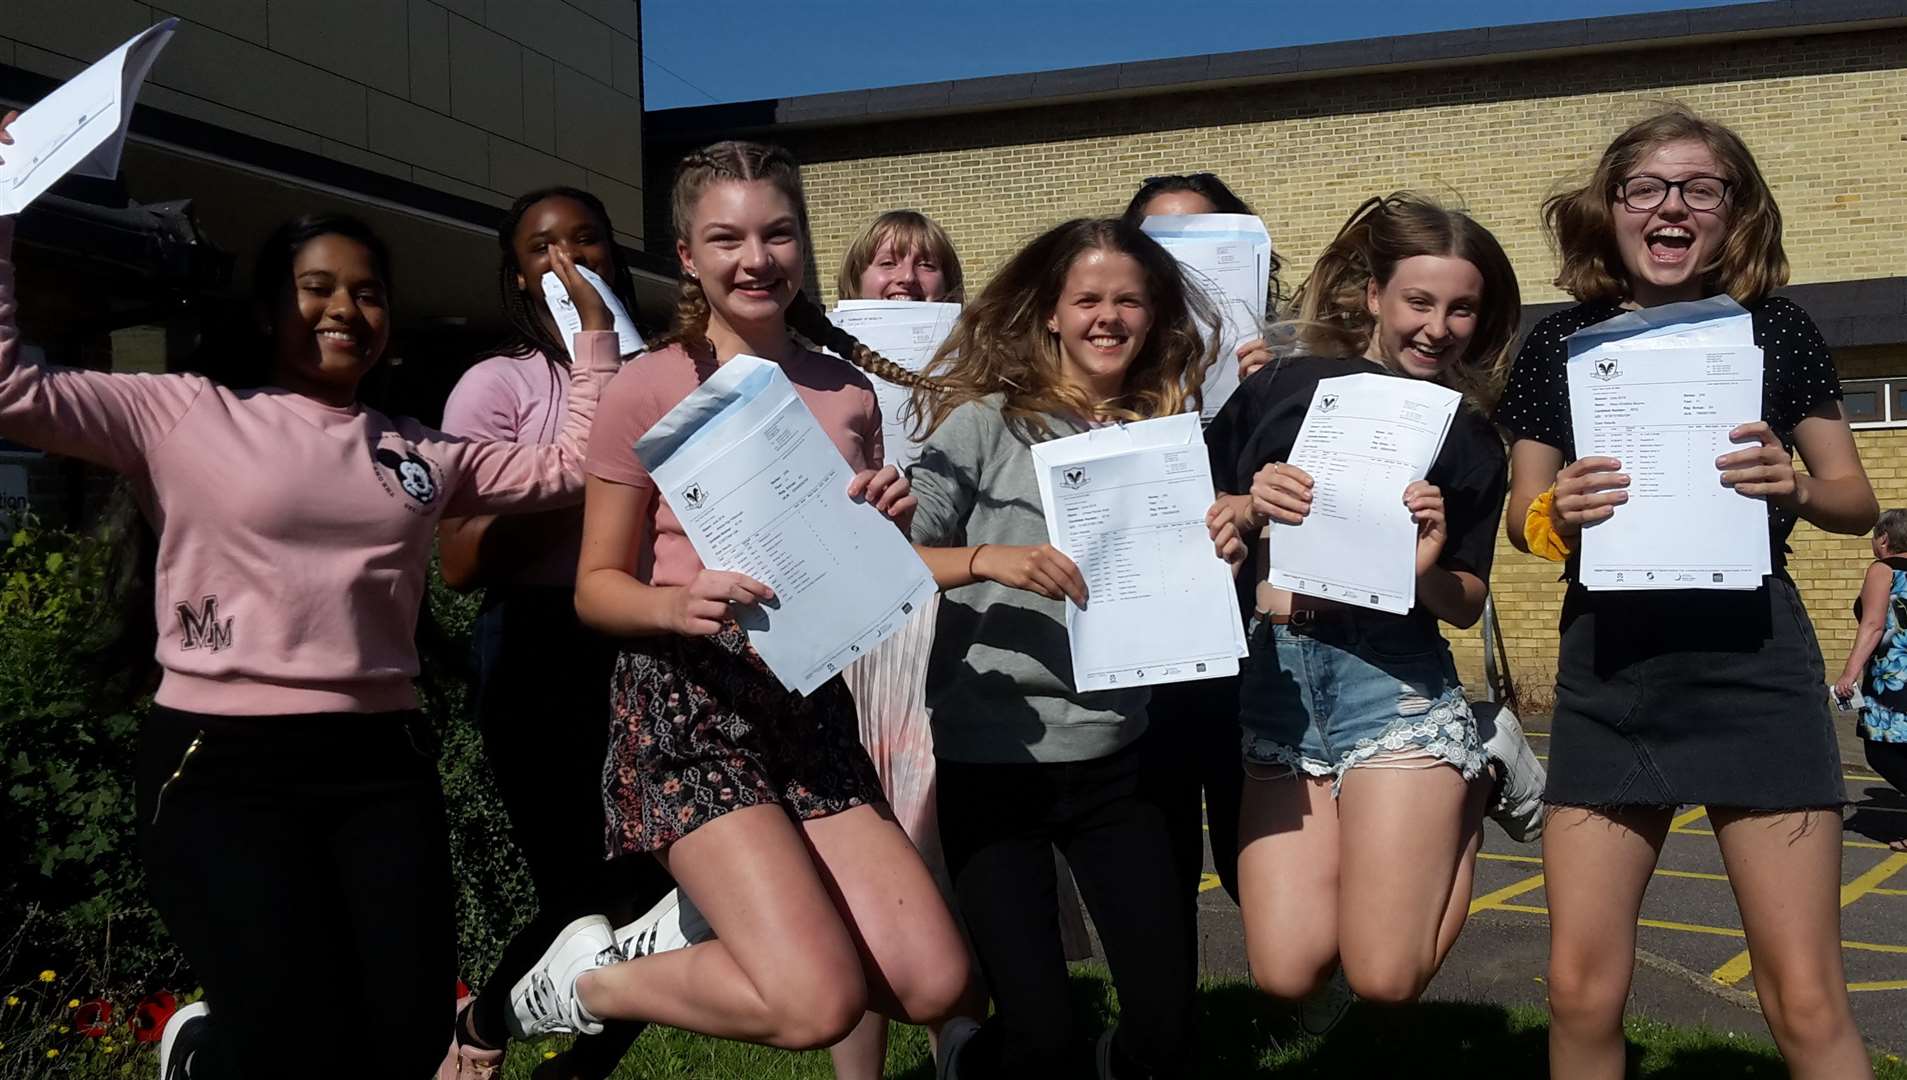 Girls at Highsted Grammar School jump for joy with their results